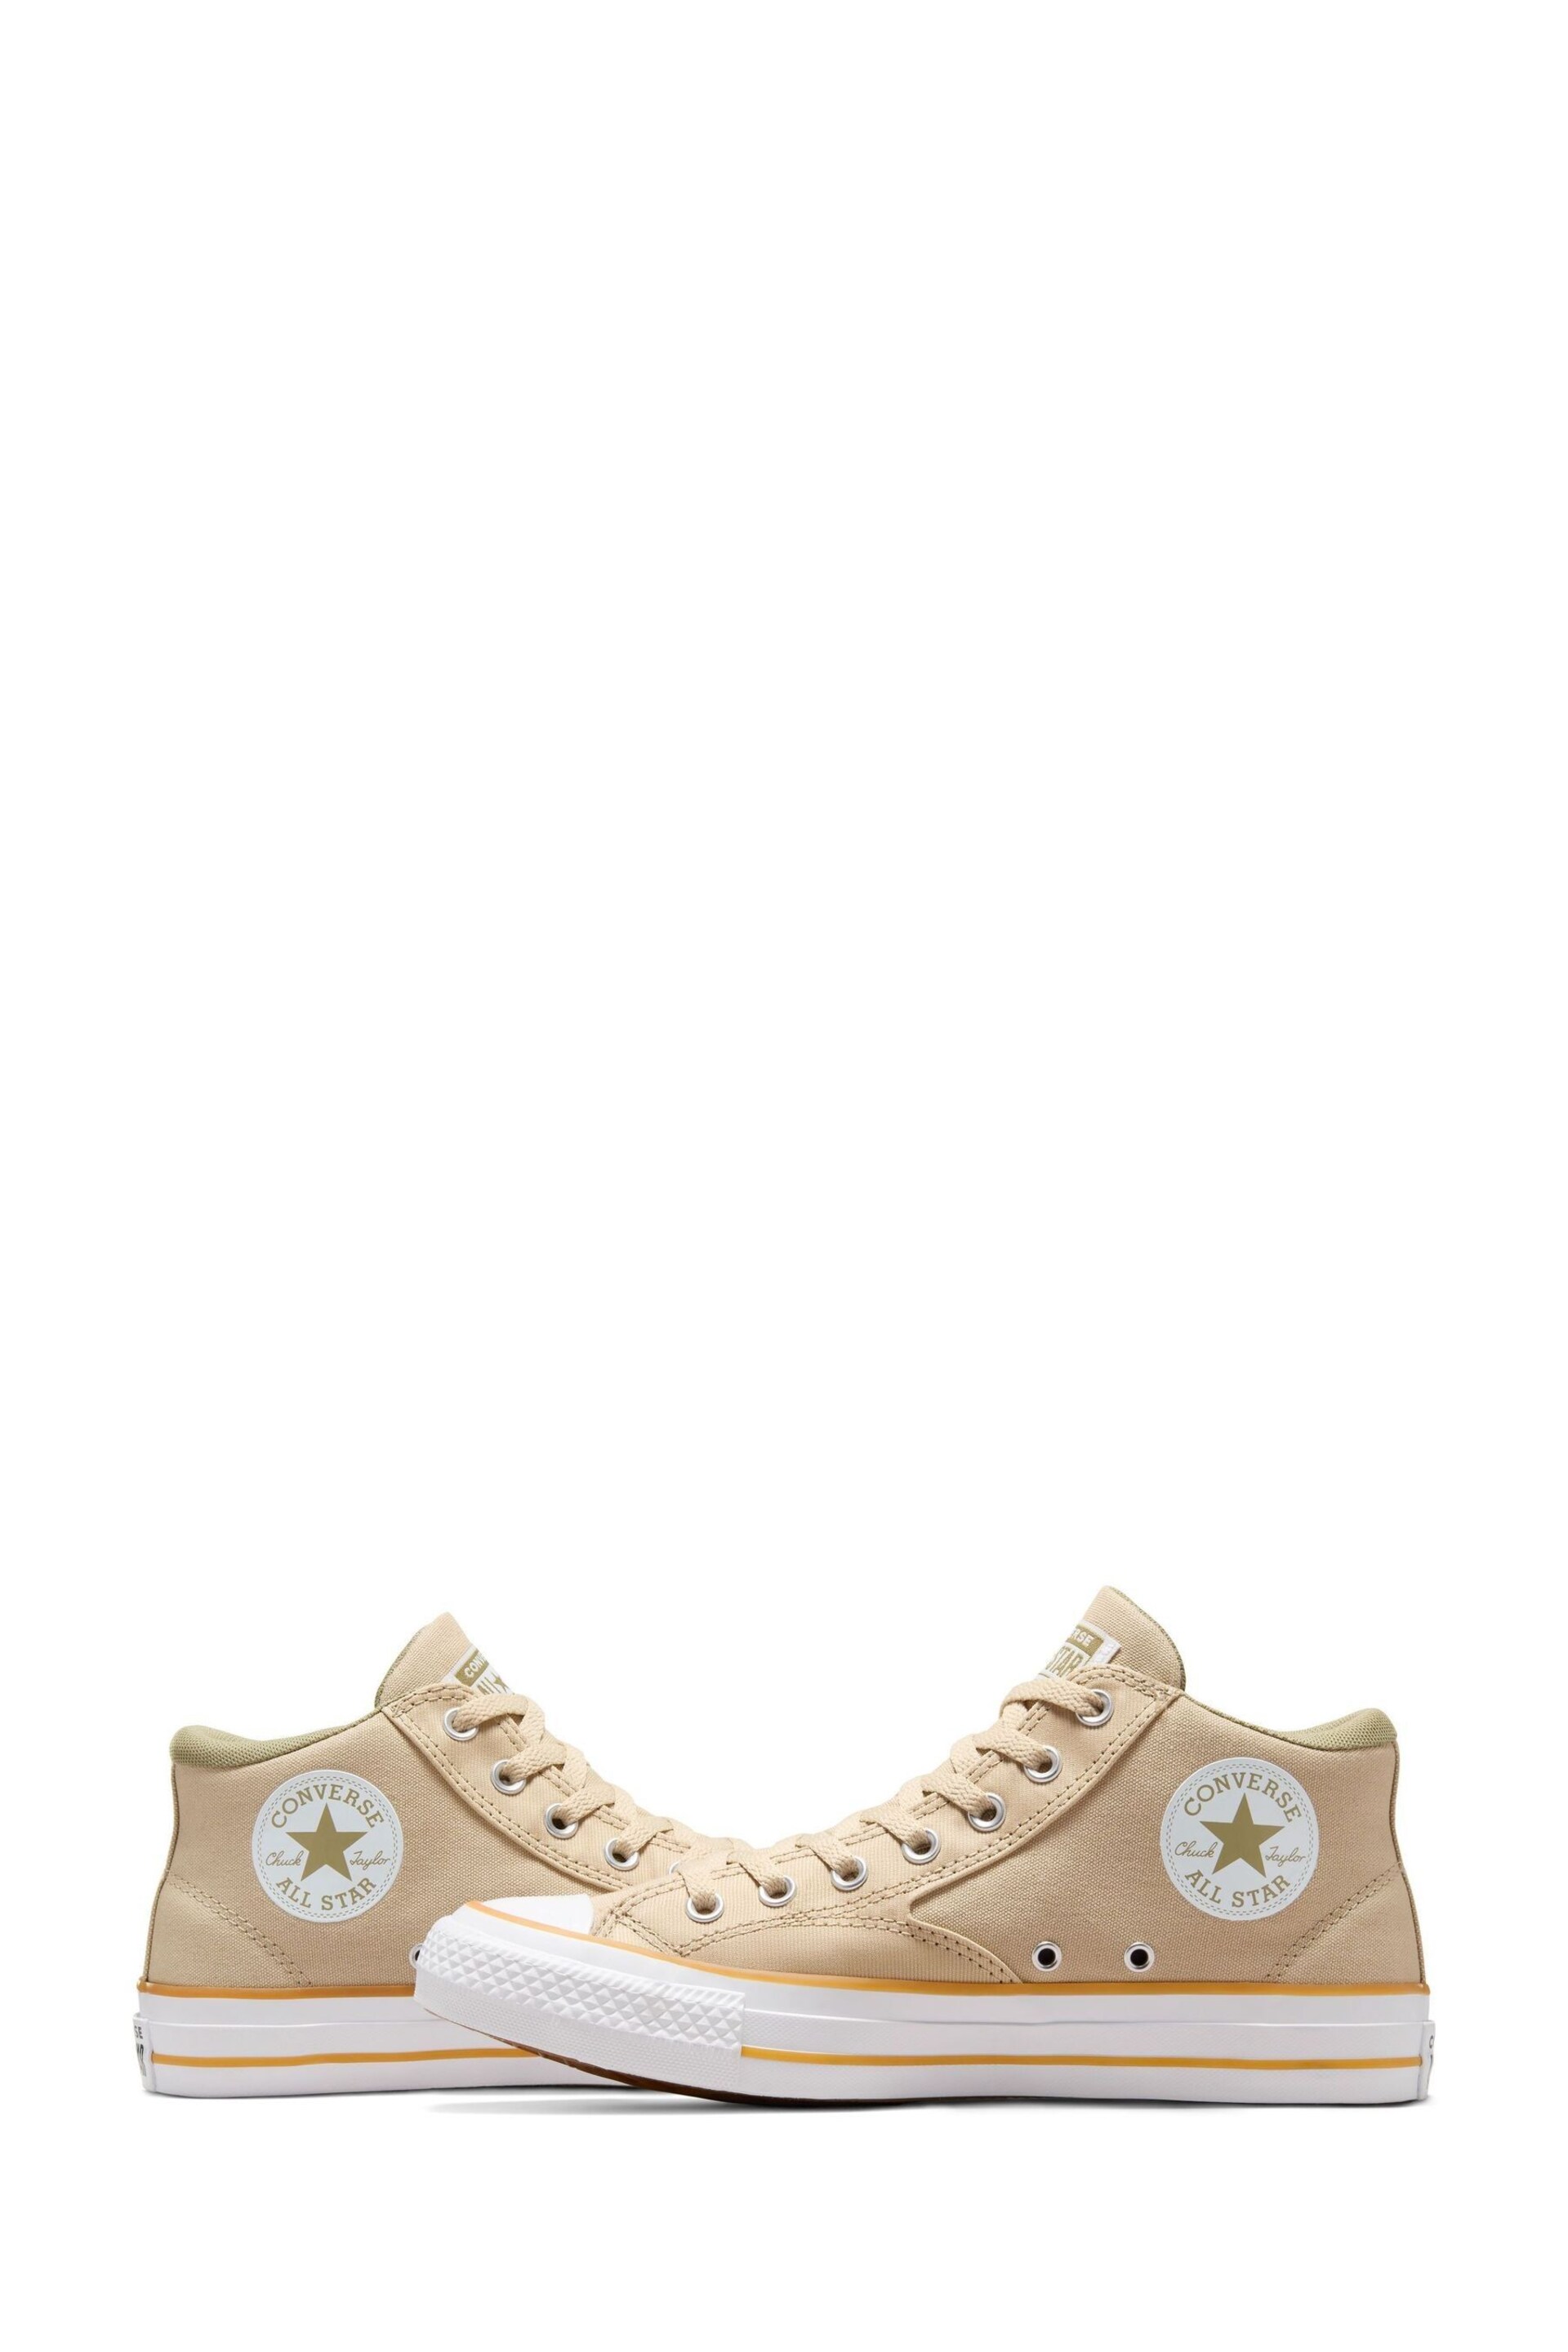 Converse Natural Chuck Taylor All Star Malden Street Trainers - Image 8 of 9